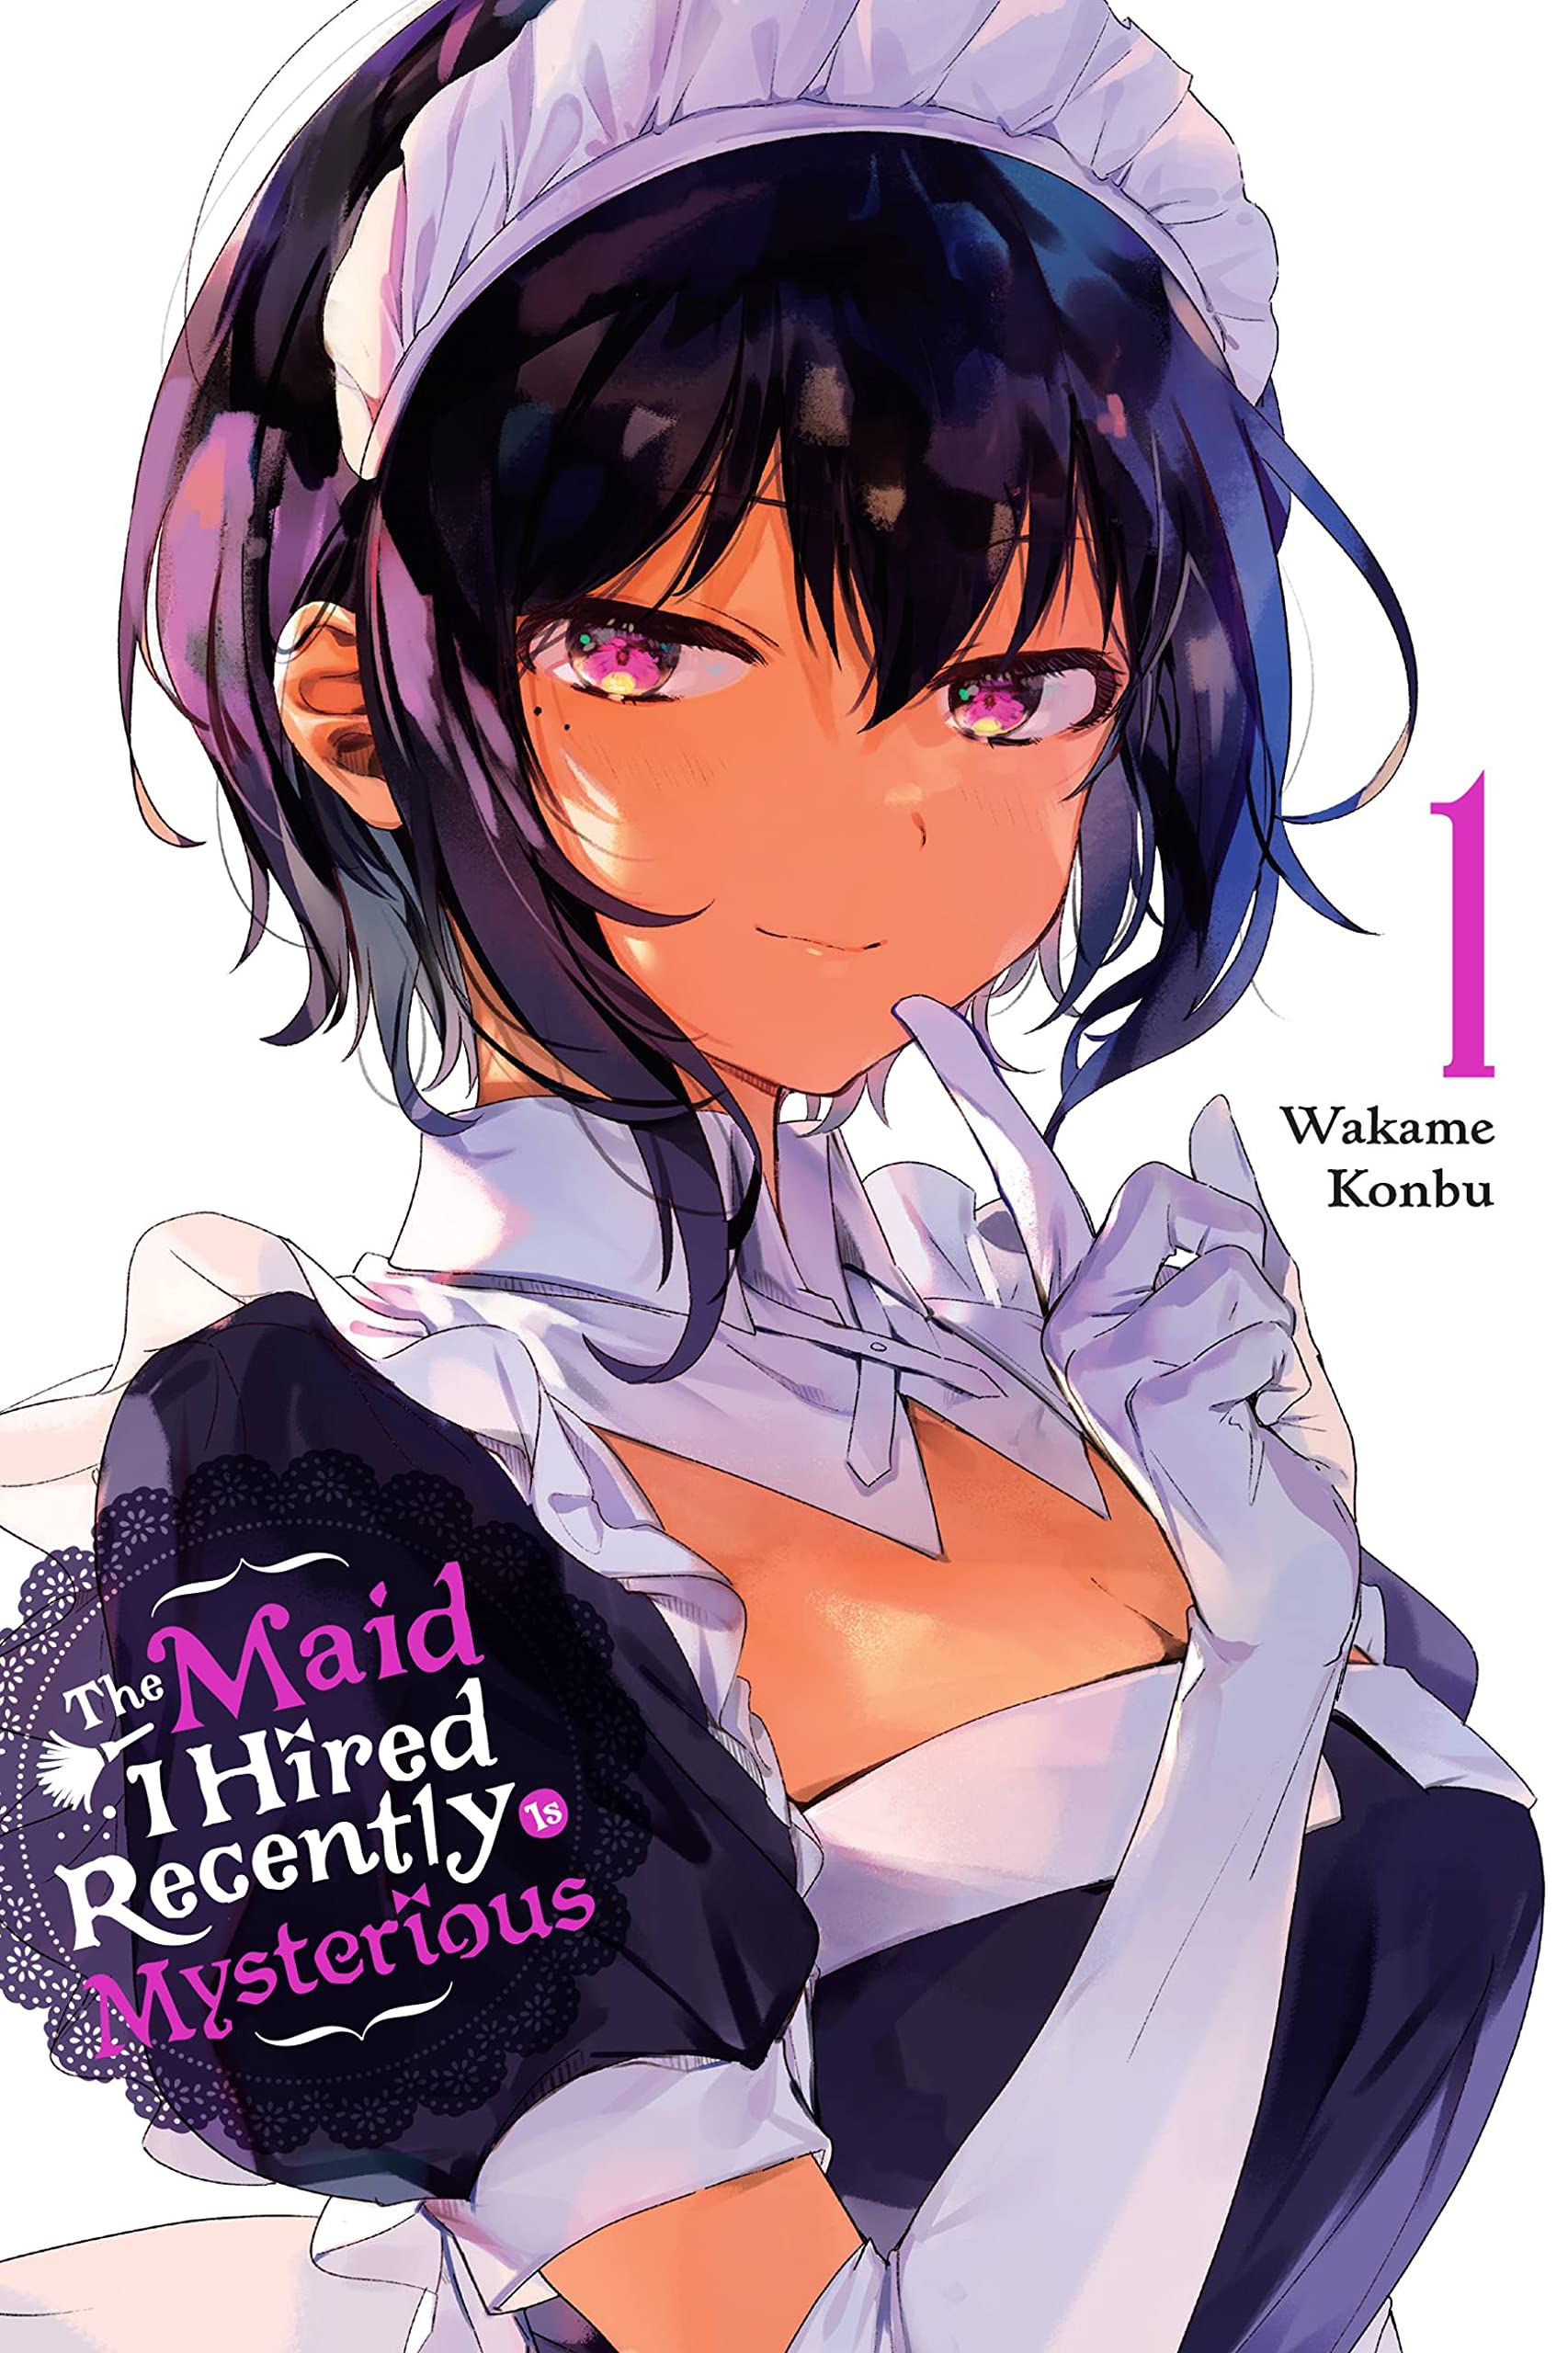 My recently hired maid is suspicious